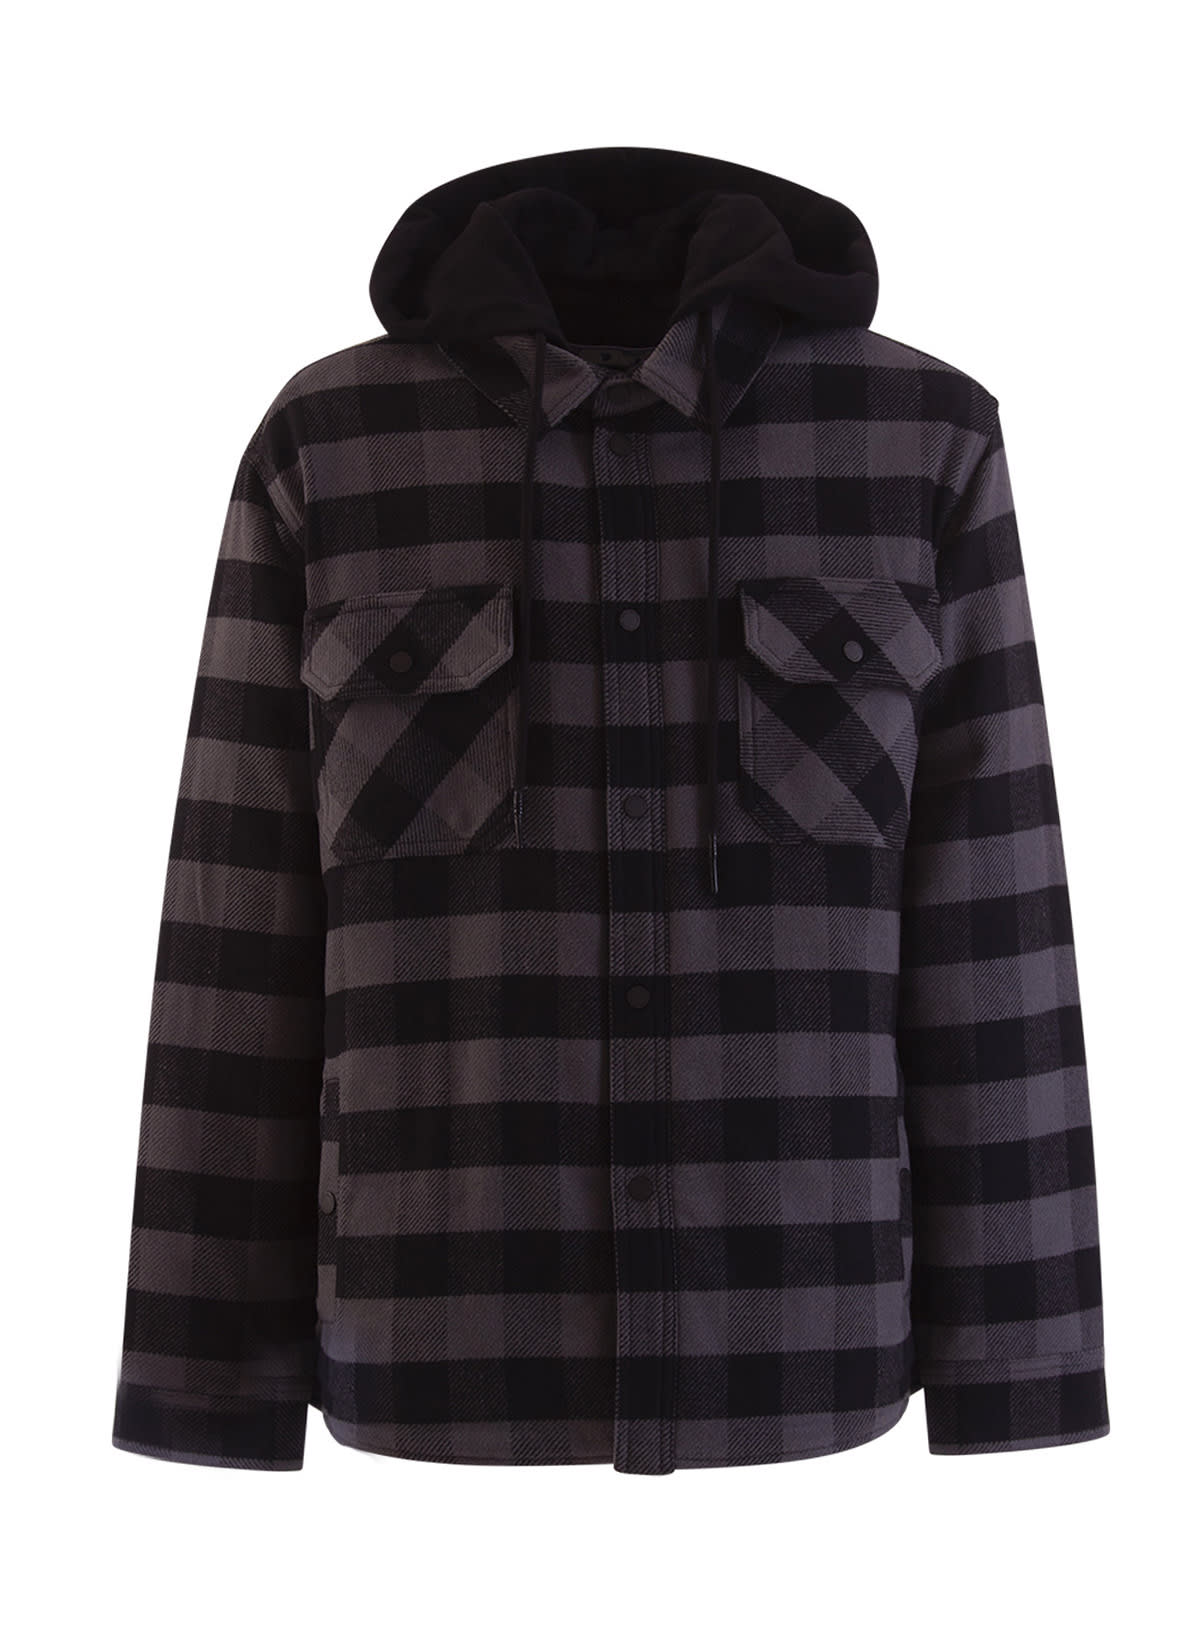 Off-white Checked Hooded Shirt